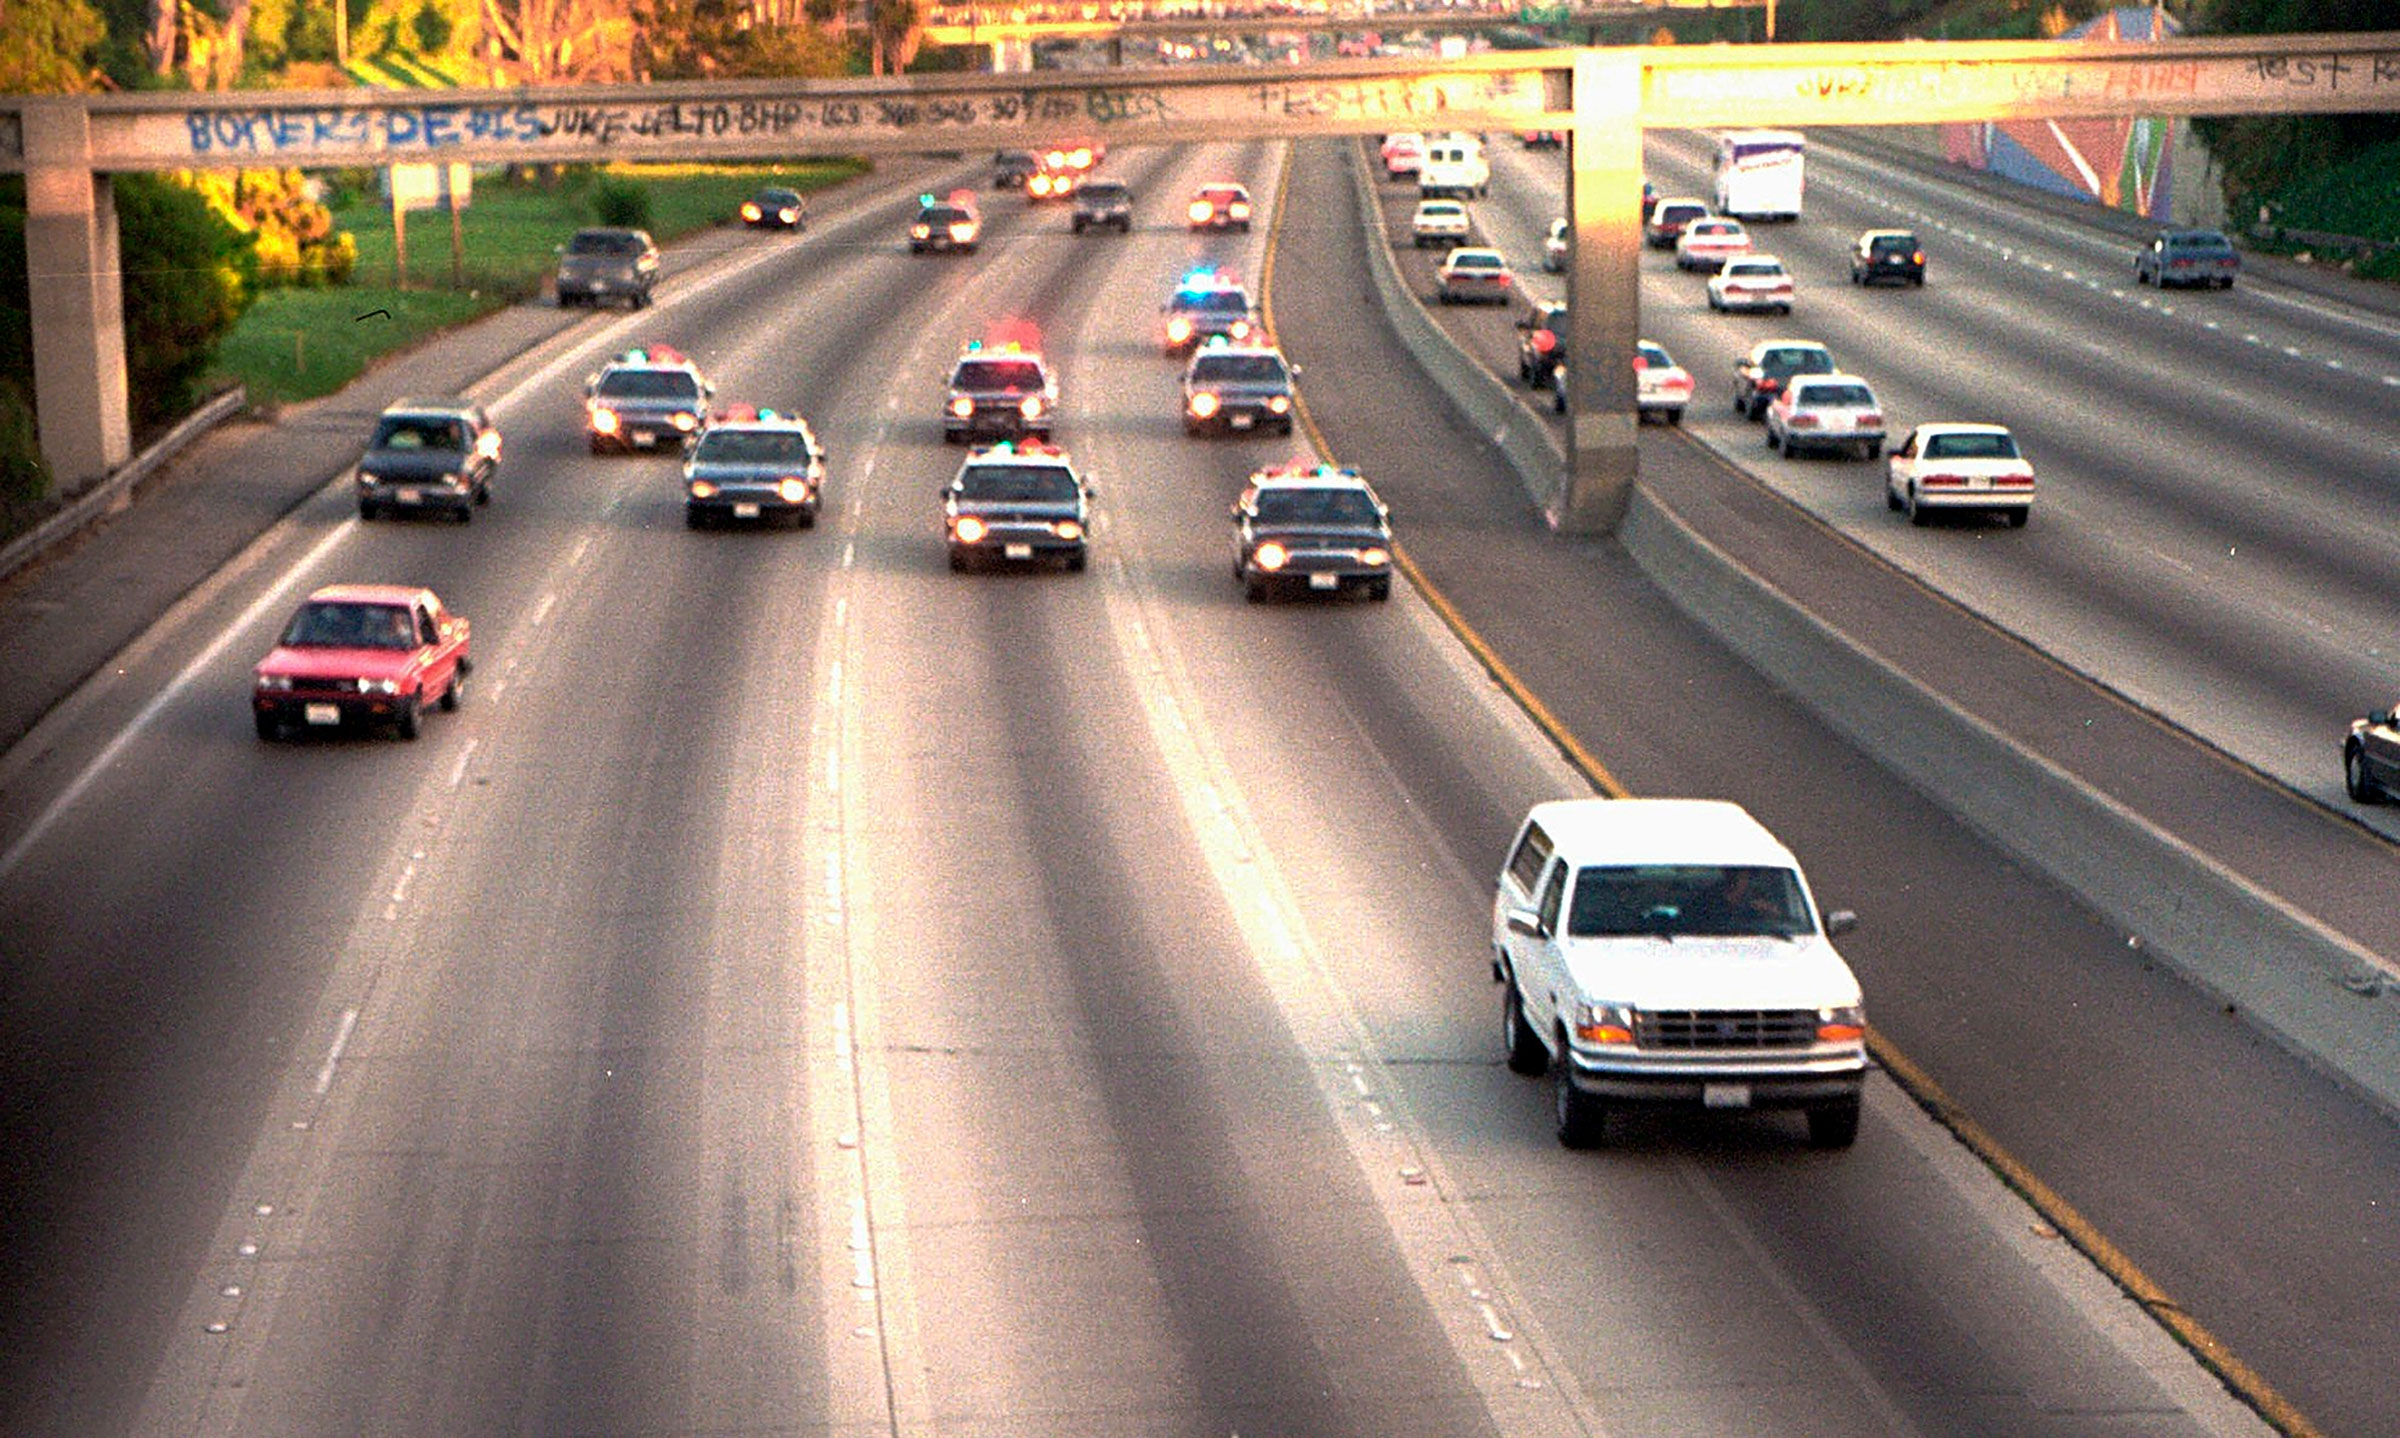 A white Ford Bronco, driven by Al Cowlings carrying O.J. Simpson, is trailed by Los Angeles police cars as it travels on a freeway in Los Angeles on June 17, 1994.